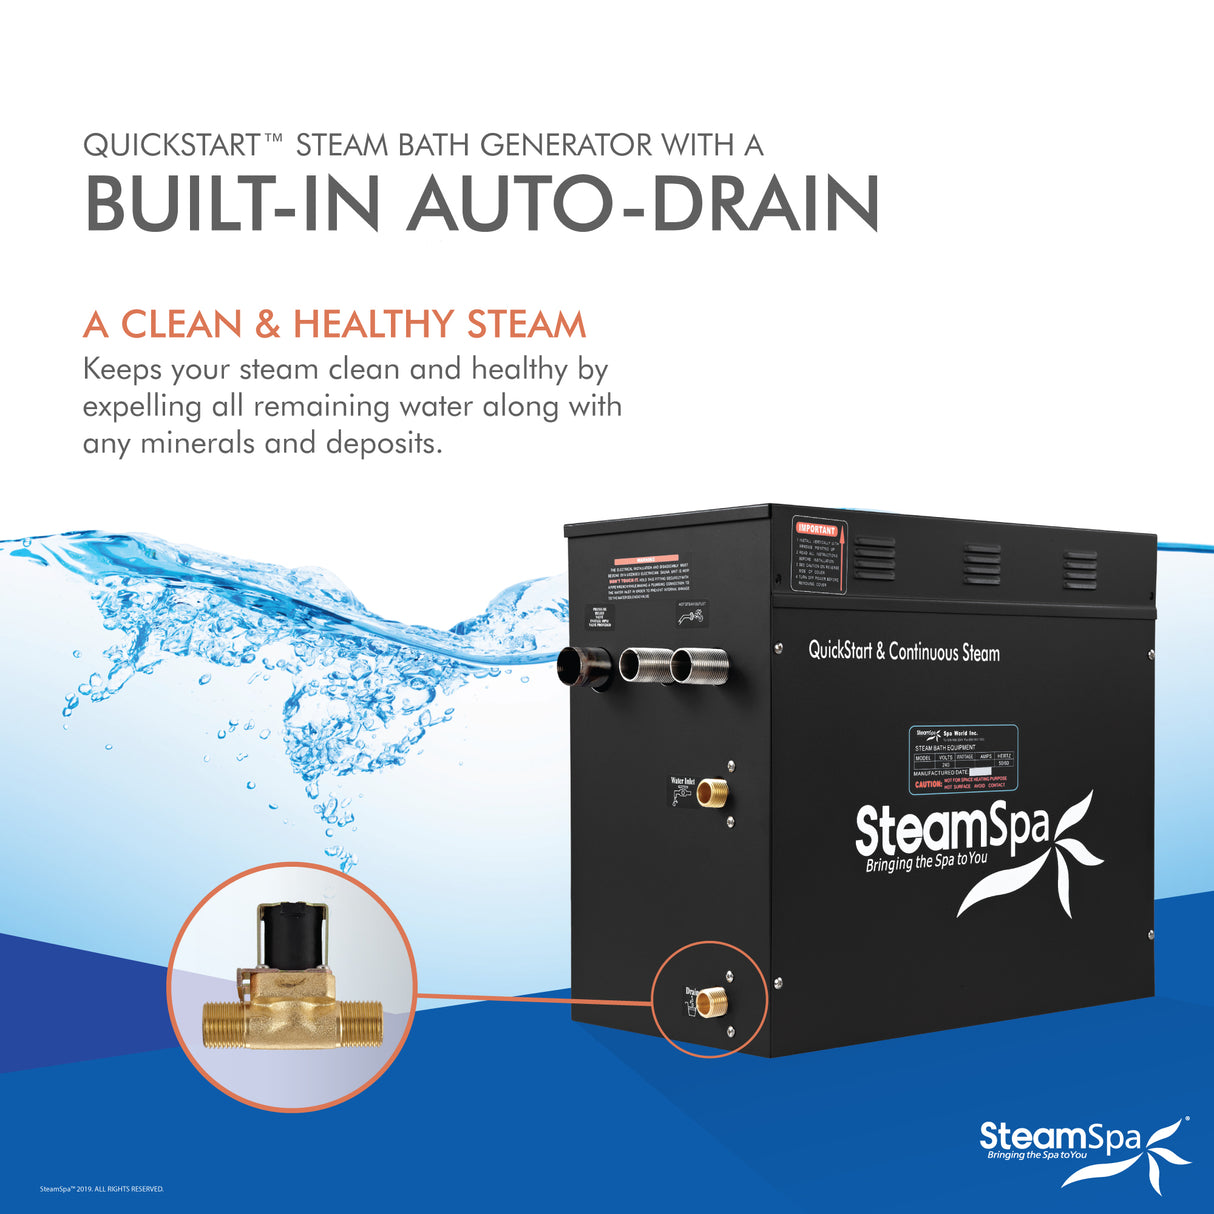 Raven Series 10.5kW QuickStart Steam Bath Generator Package in Polished Chrome RVT1050CH-A